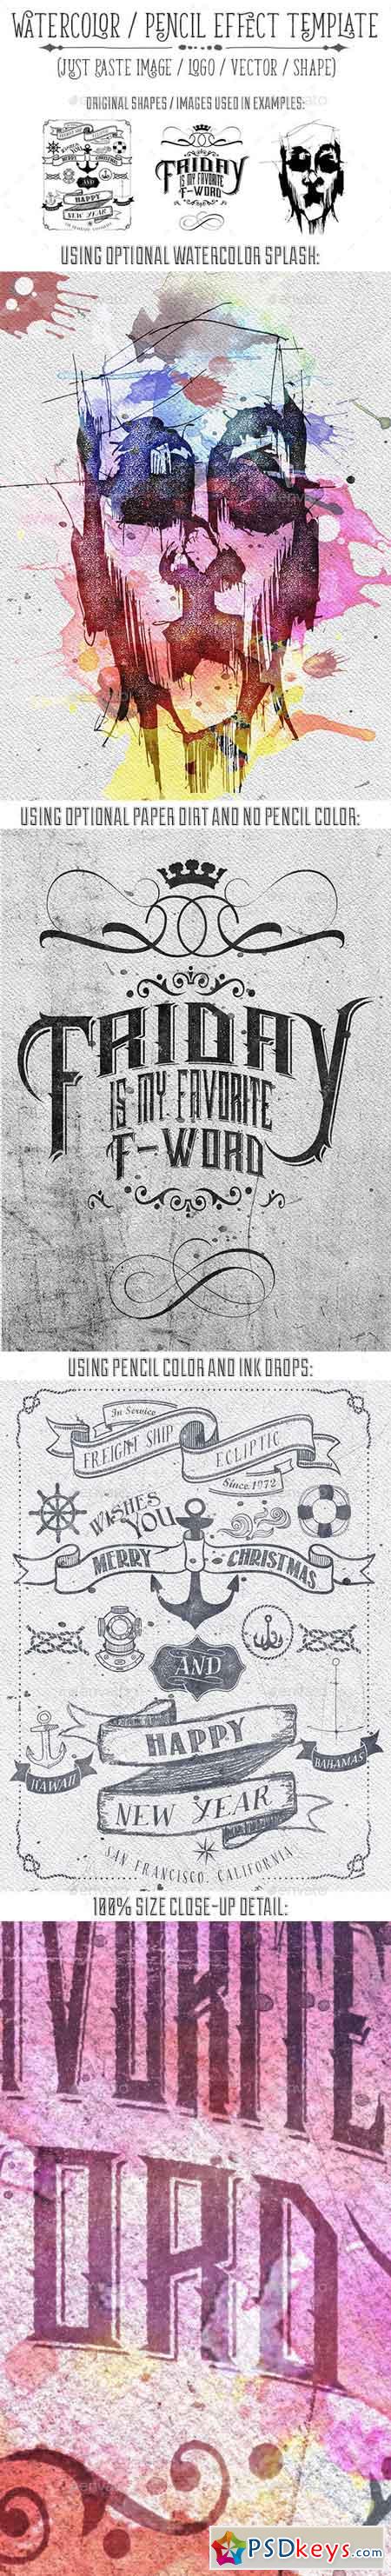 Watercolor or Pencil Press Style Text, Logo, Image Treatment 14484286